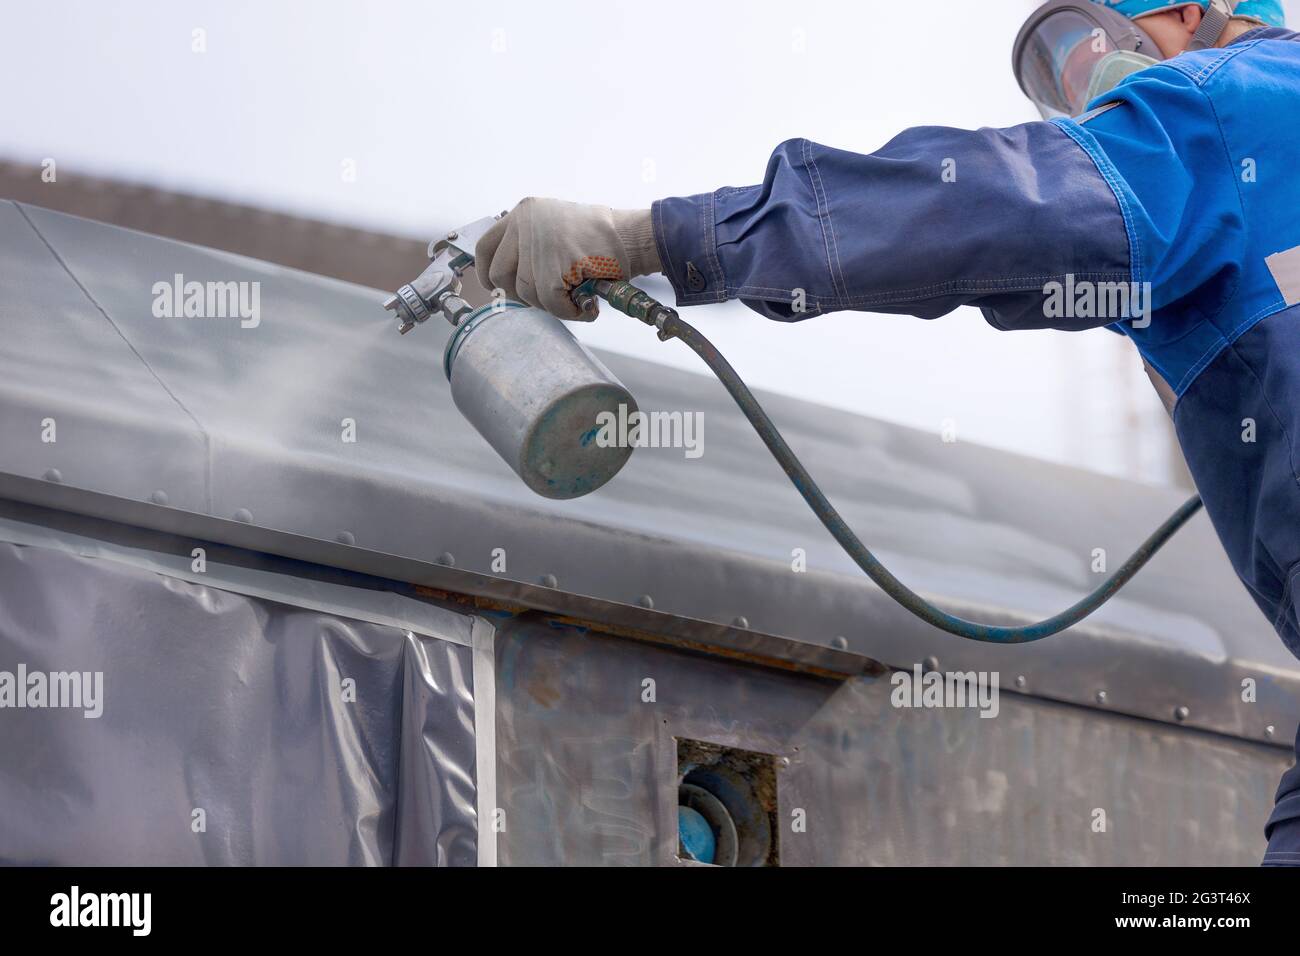 Industrial work. Priming of metal products from the compressor gun. A worker in overalls and a protective mask paints the body o Stock Photo